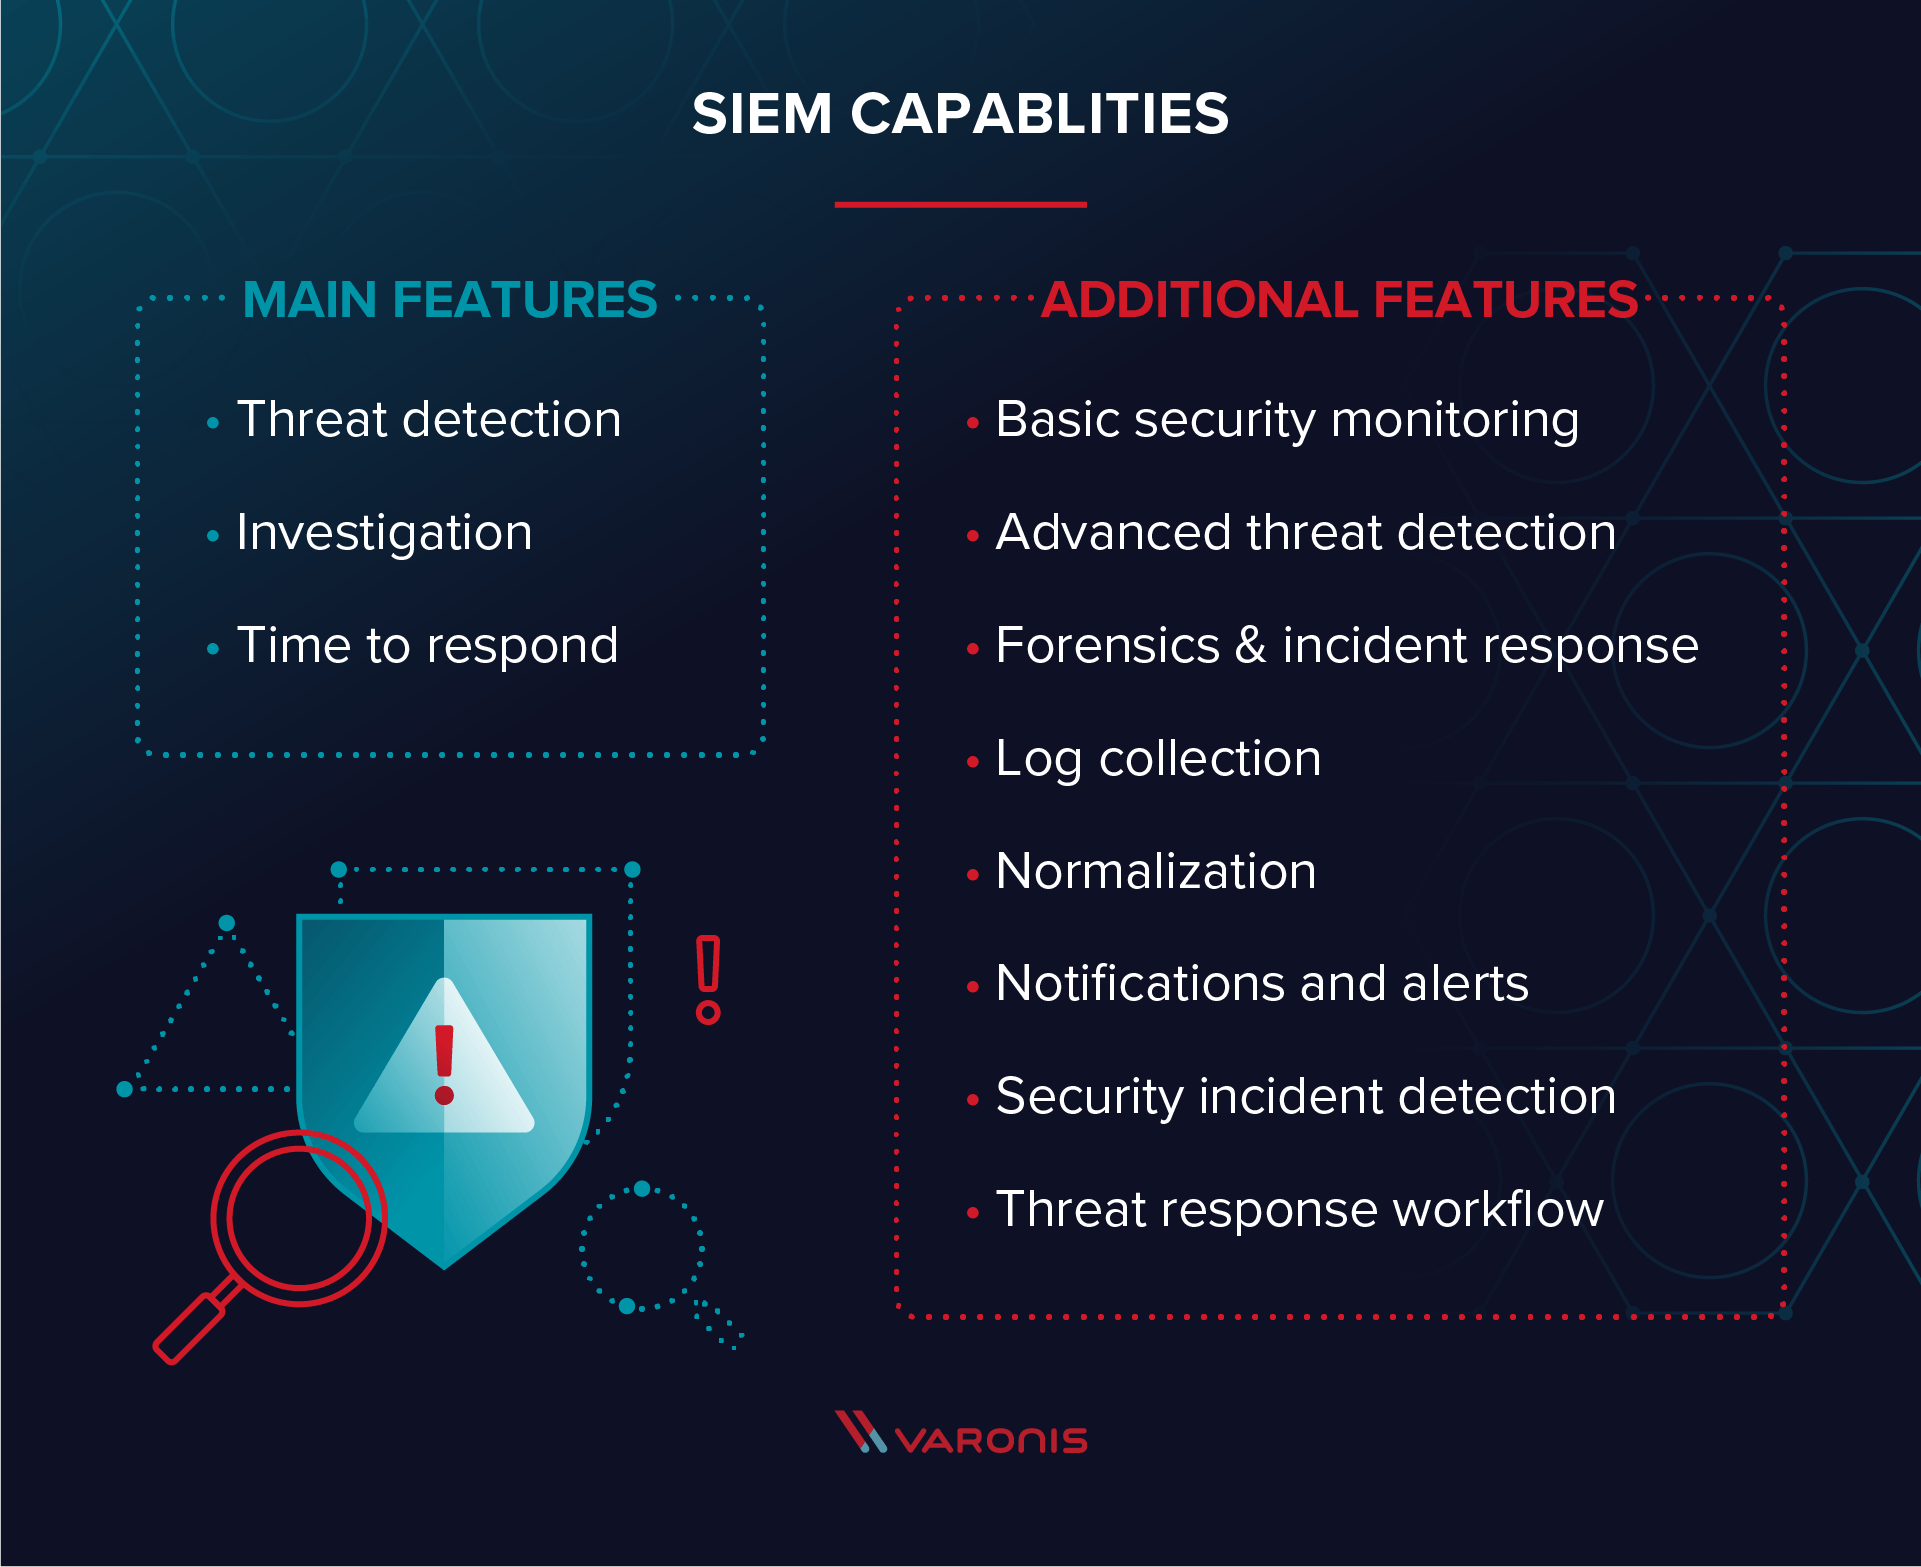 SIEM capabilities illustration with text that's in the body copy below the image